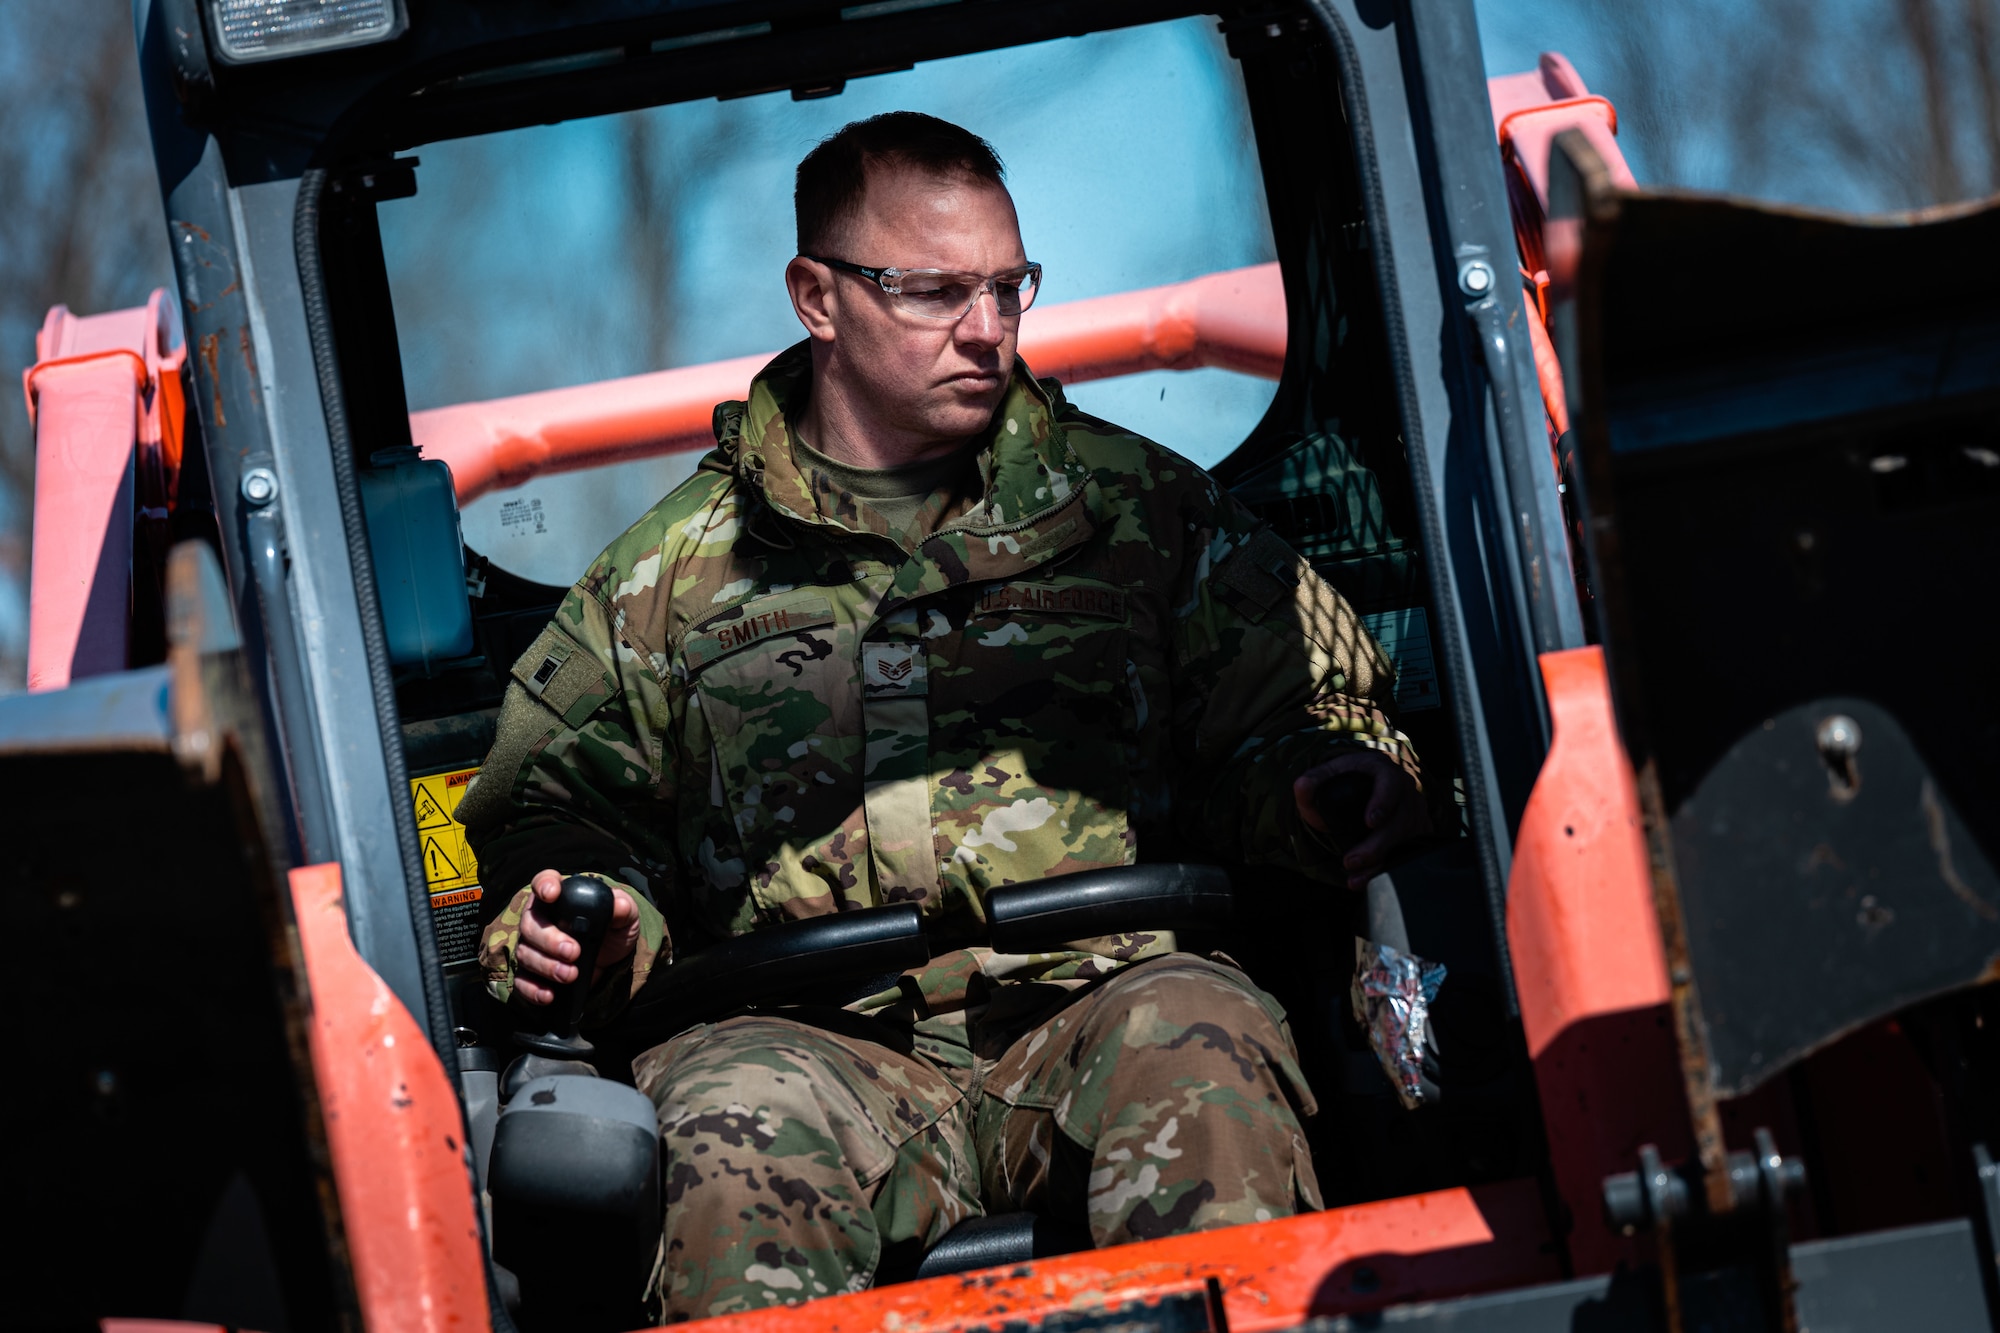 Air Force Staff Sgt. Daniel Smith, an Airman with the 181st Civil Engineer Squadron, operates heavy machinery during a route-clearing exercise at Camp Atterbury Joint Maneuver Training Center in Edinburgh, Ind., March 4, 2023. The 181st CES trained to promote cross-functional capabilities.